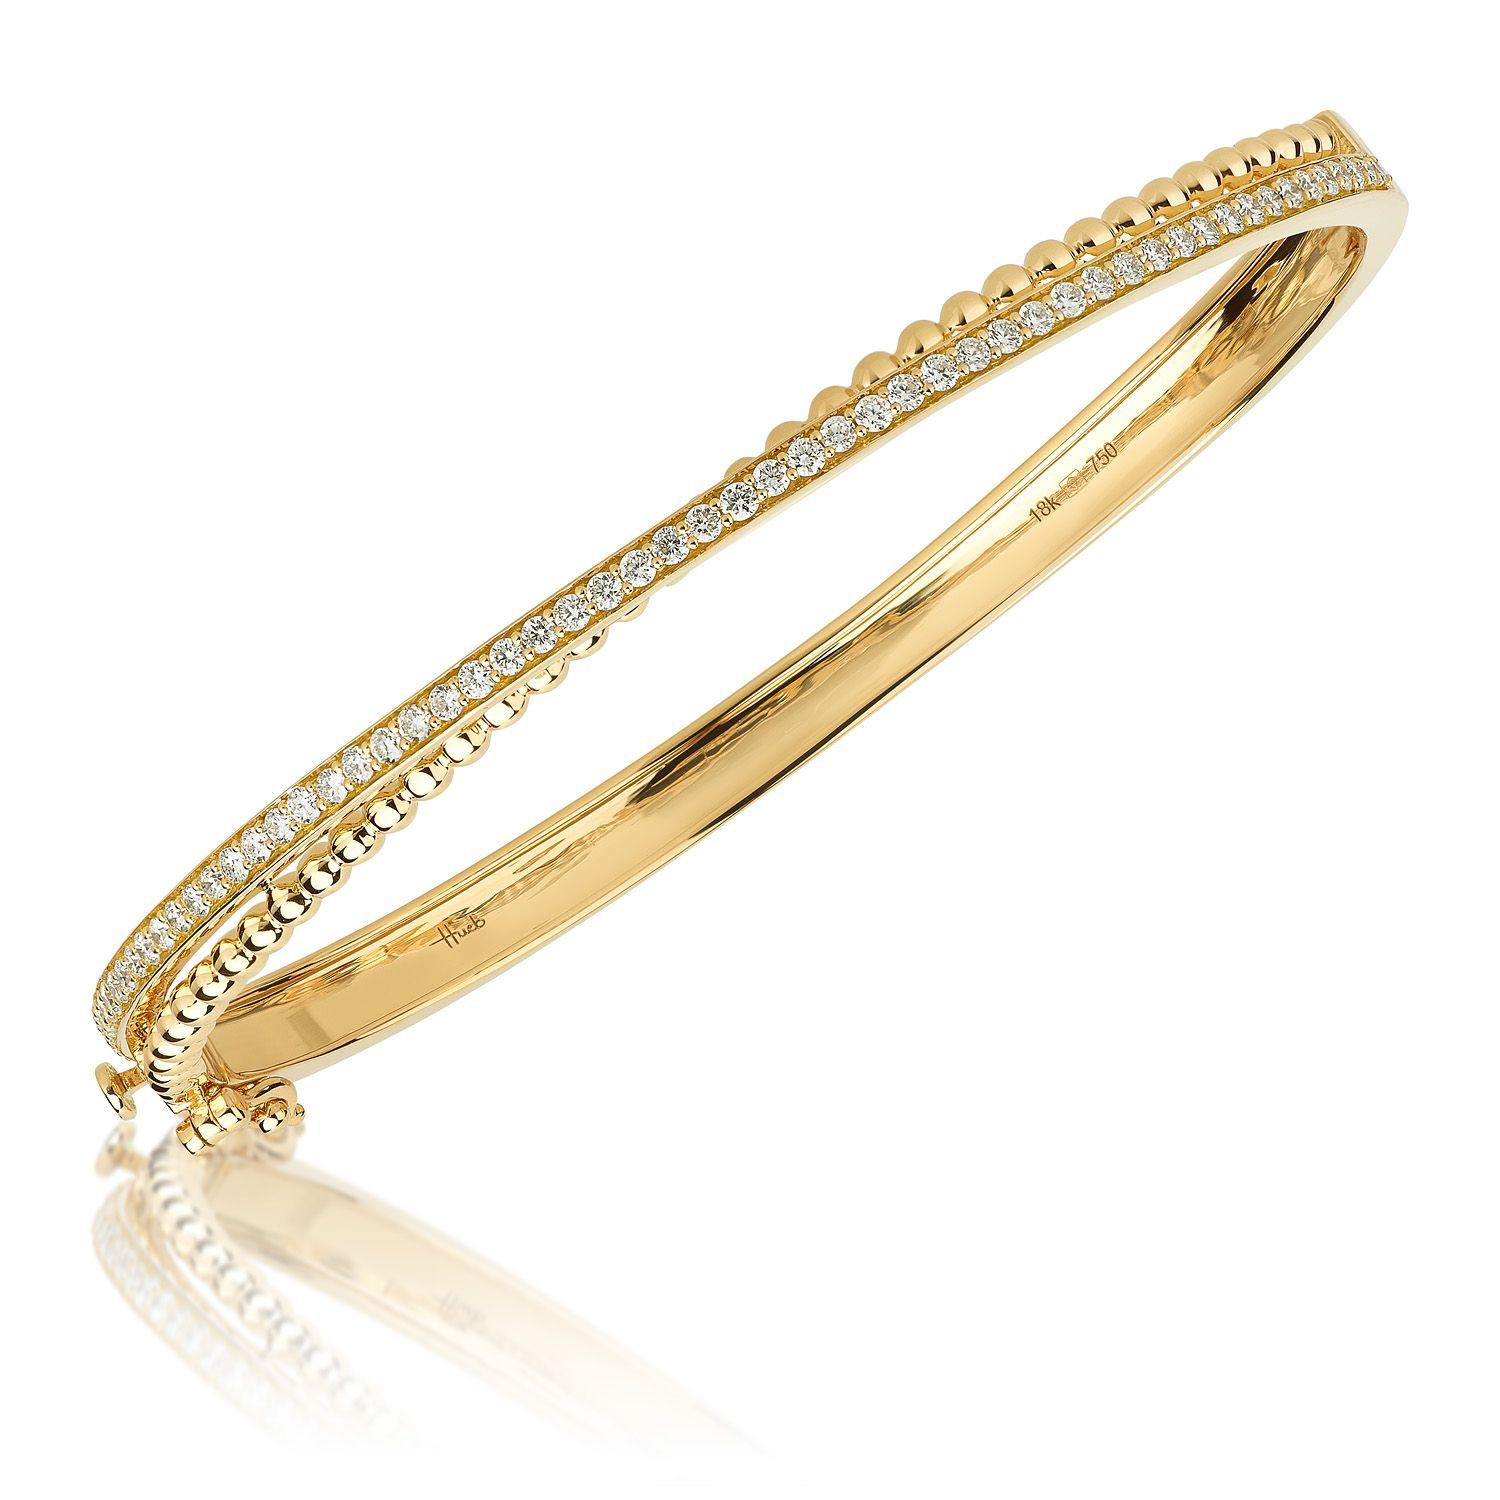 Inspired by all things effervescent, the Bubbles collection features 18k gold and diamond pieces that speak to versatility. The range of bangles, hoop earrings and rings can be mixed and matched, stacked and worn all day, every day
